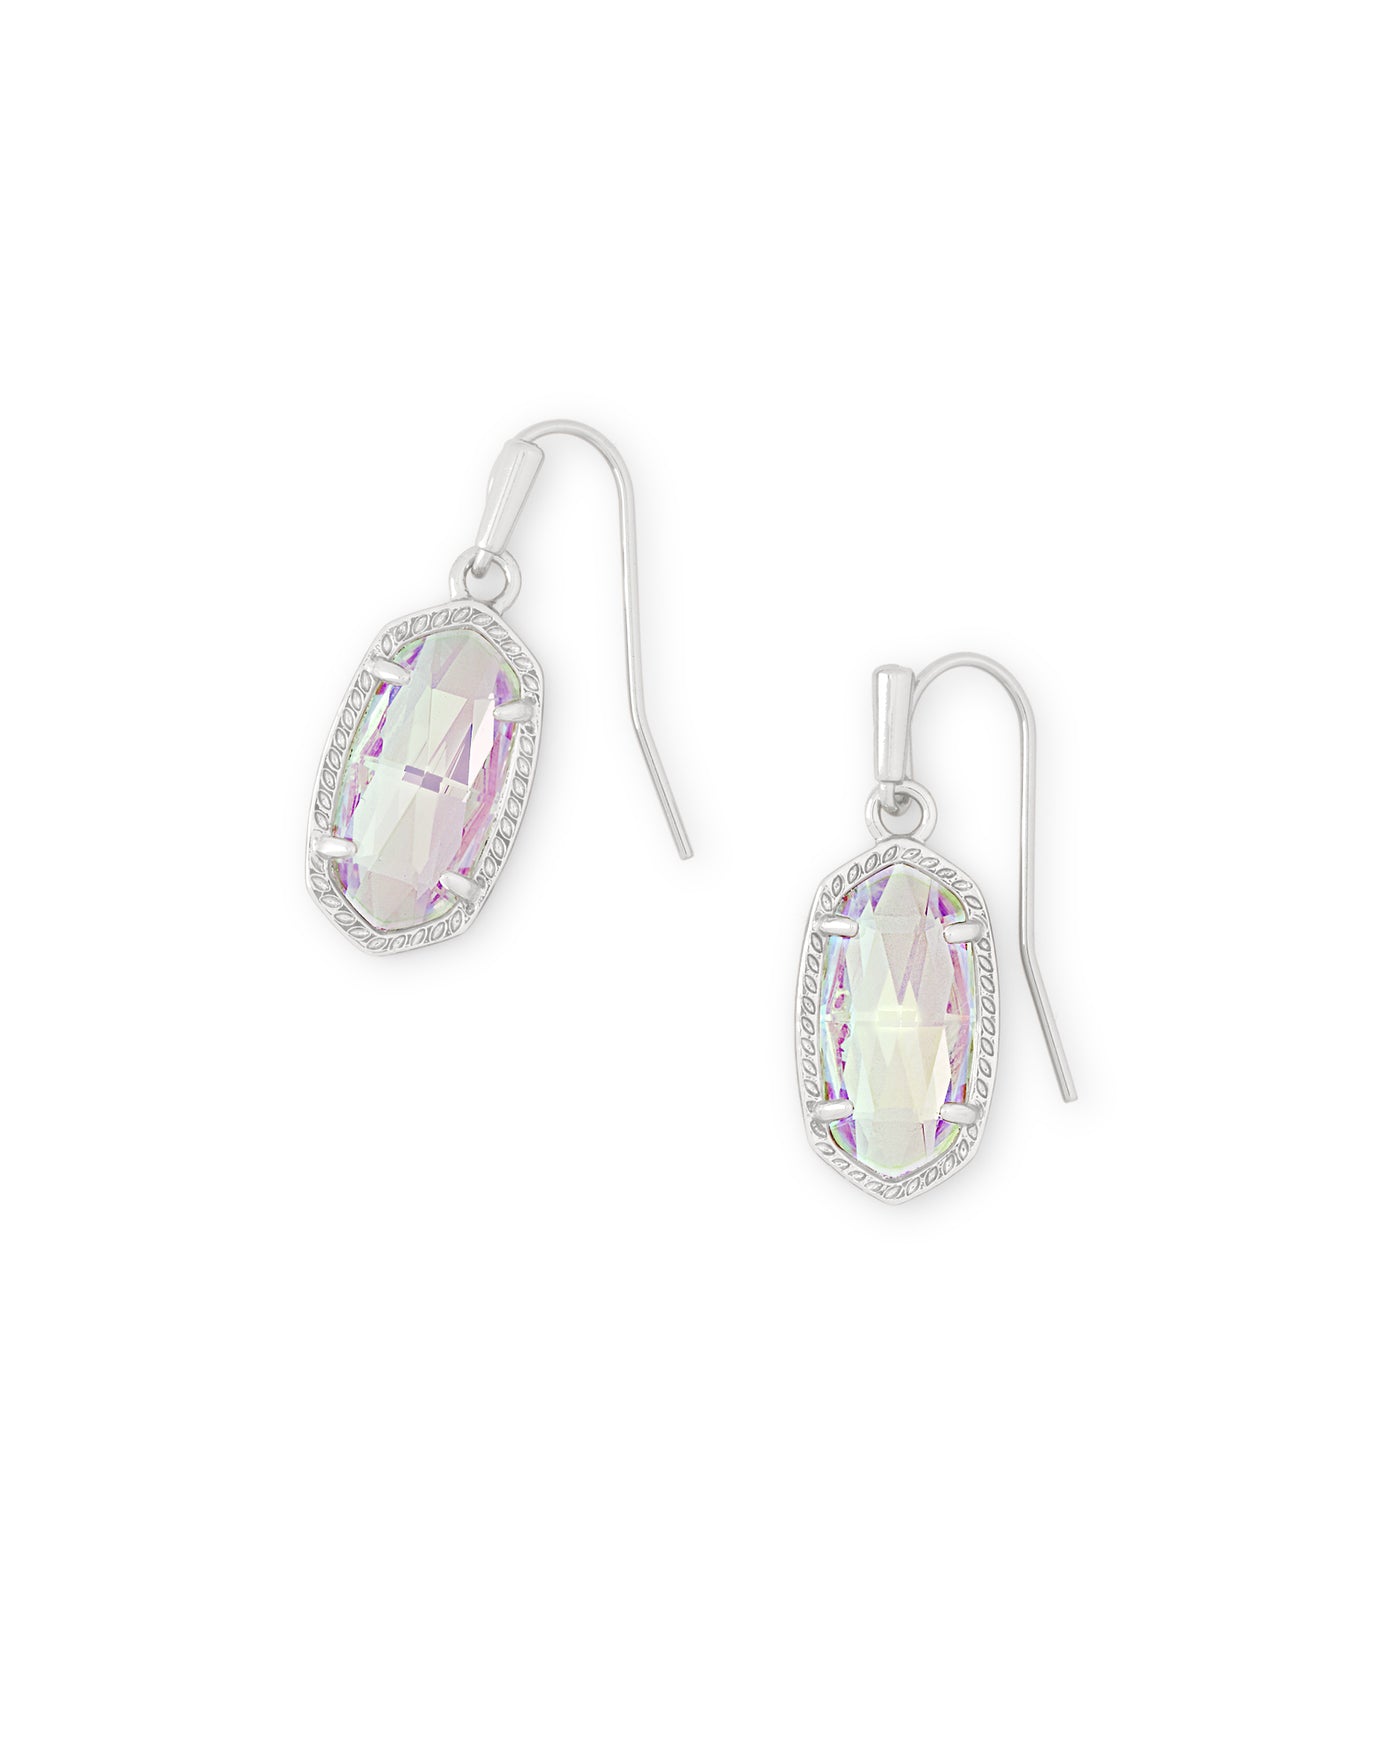 Lee Drop Earrings Silver Dichroic Glass on white background, front view.